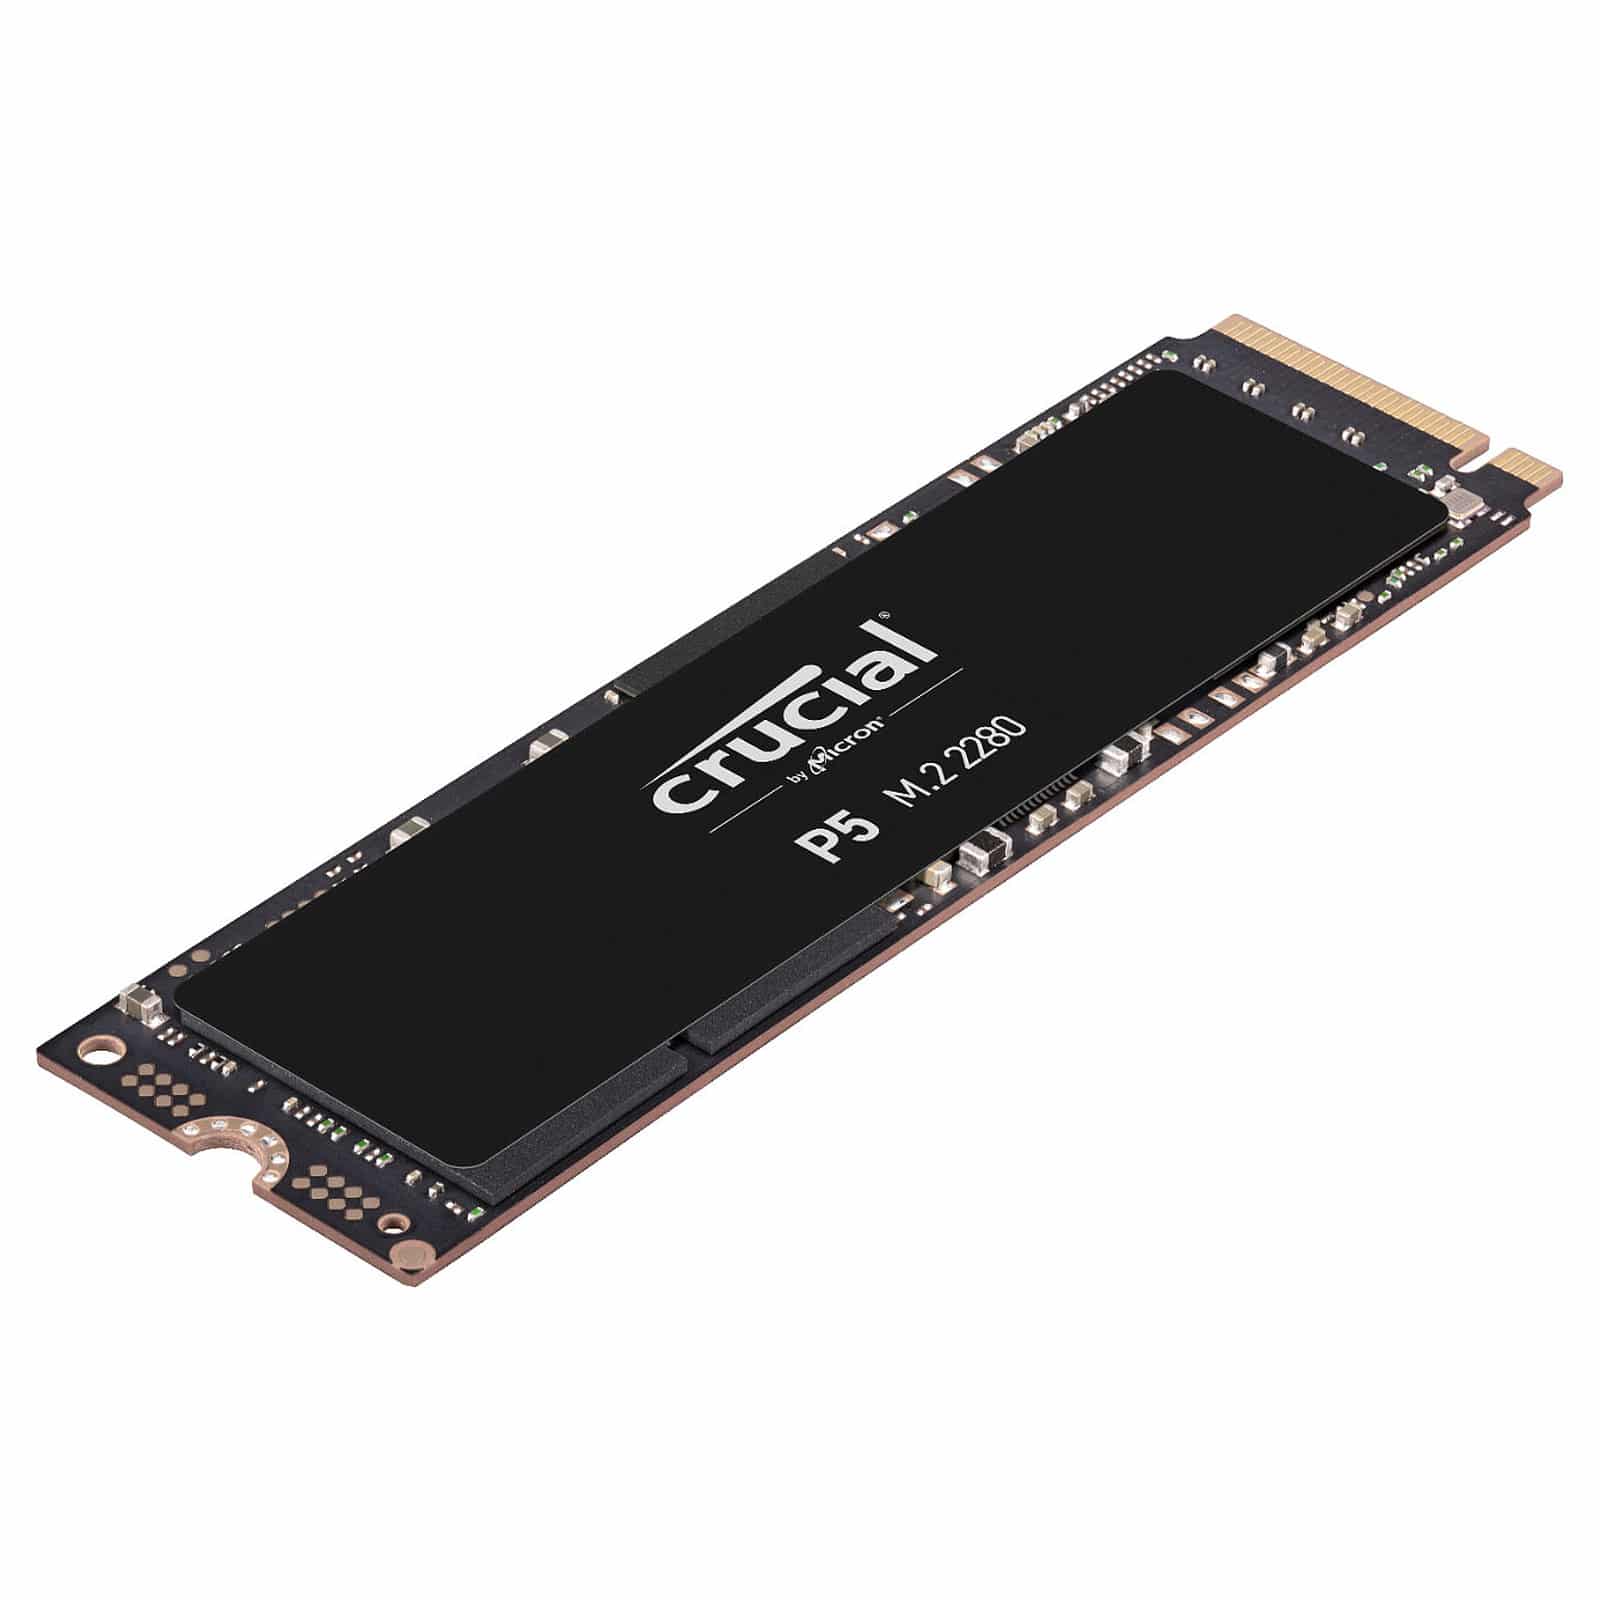 1TO SSD Nvme Crucial P5 Plus (L: 6600Mo/s) 